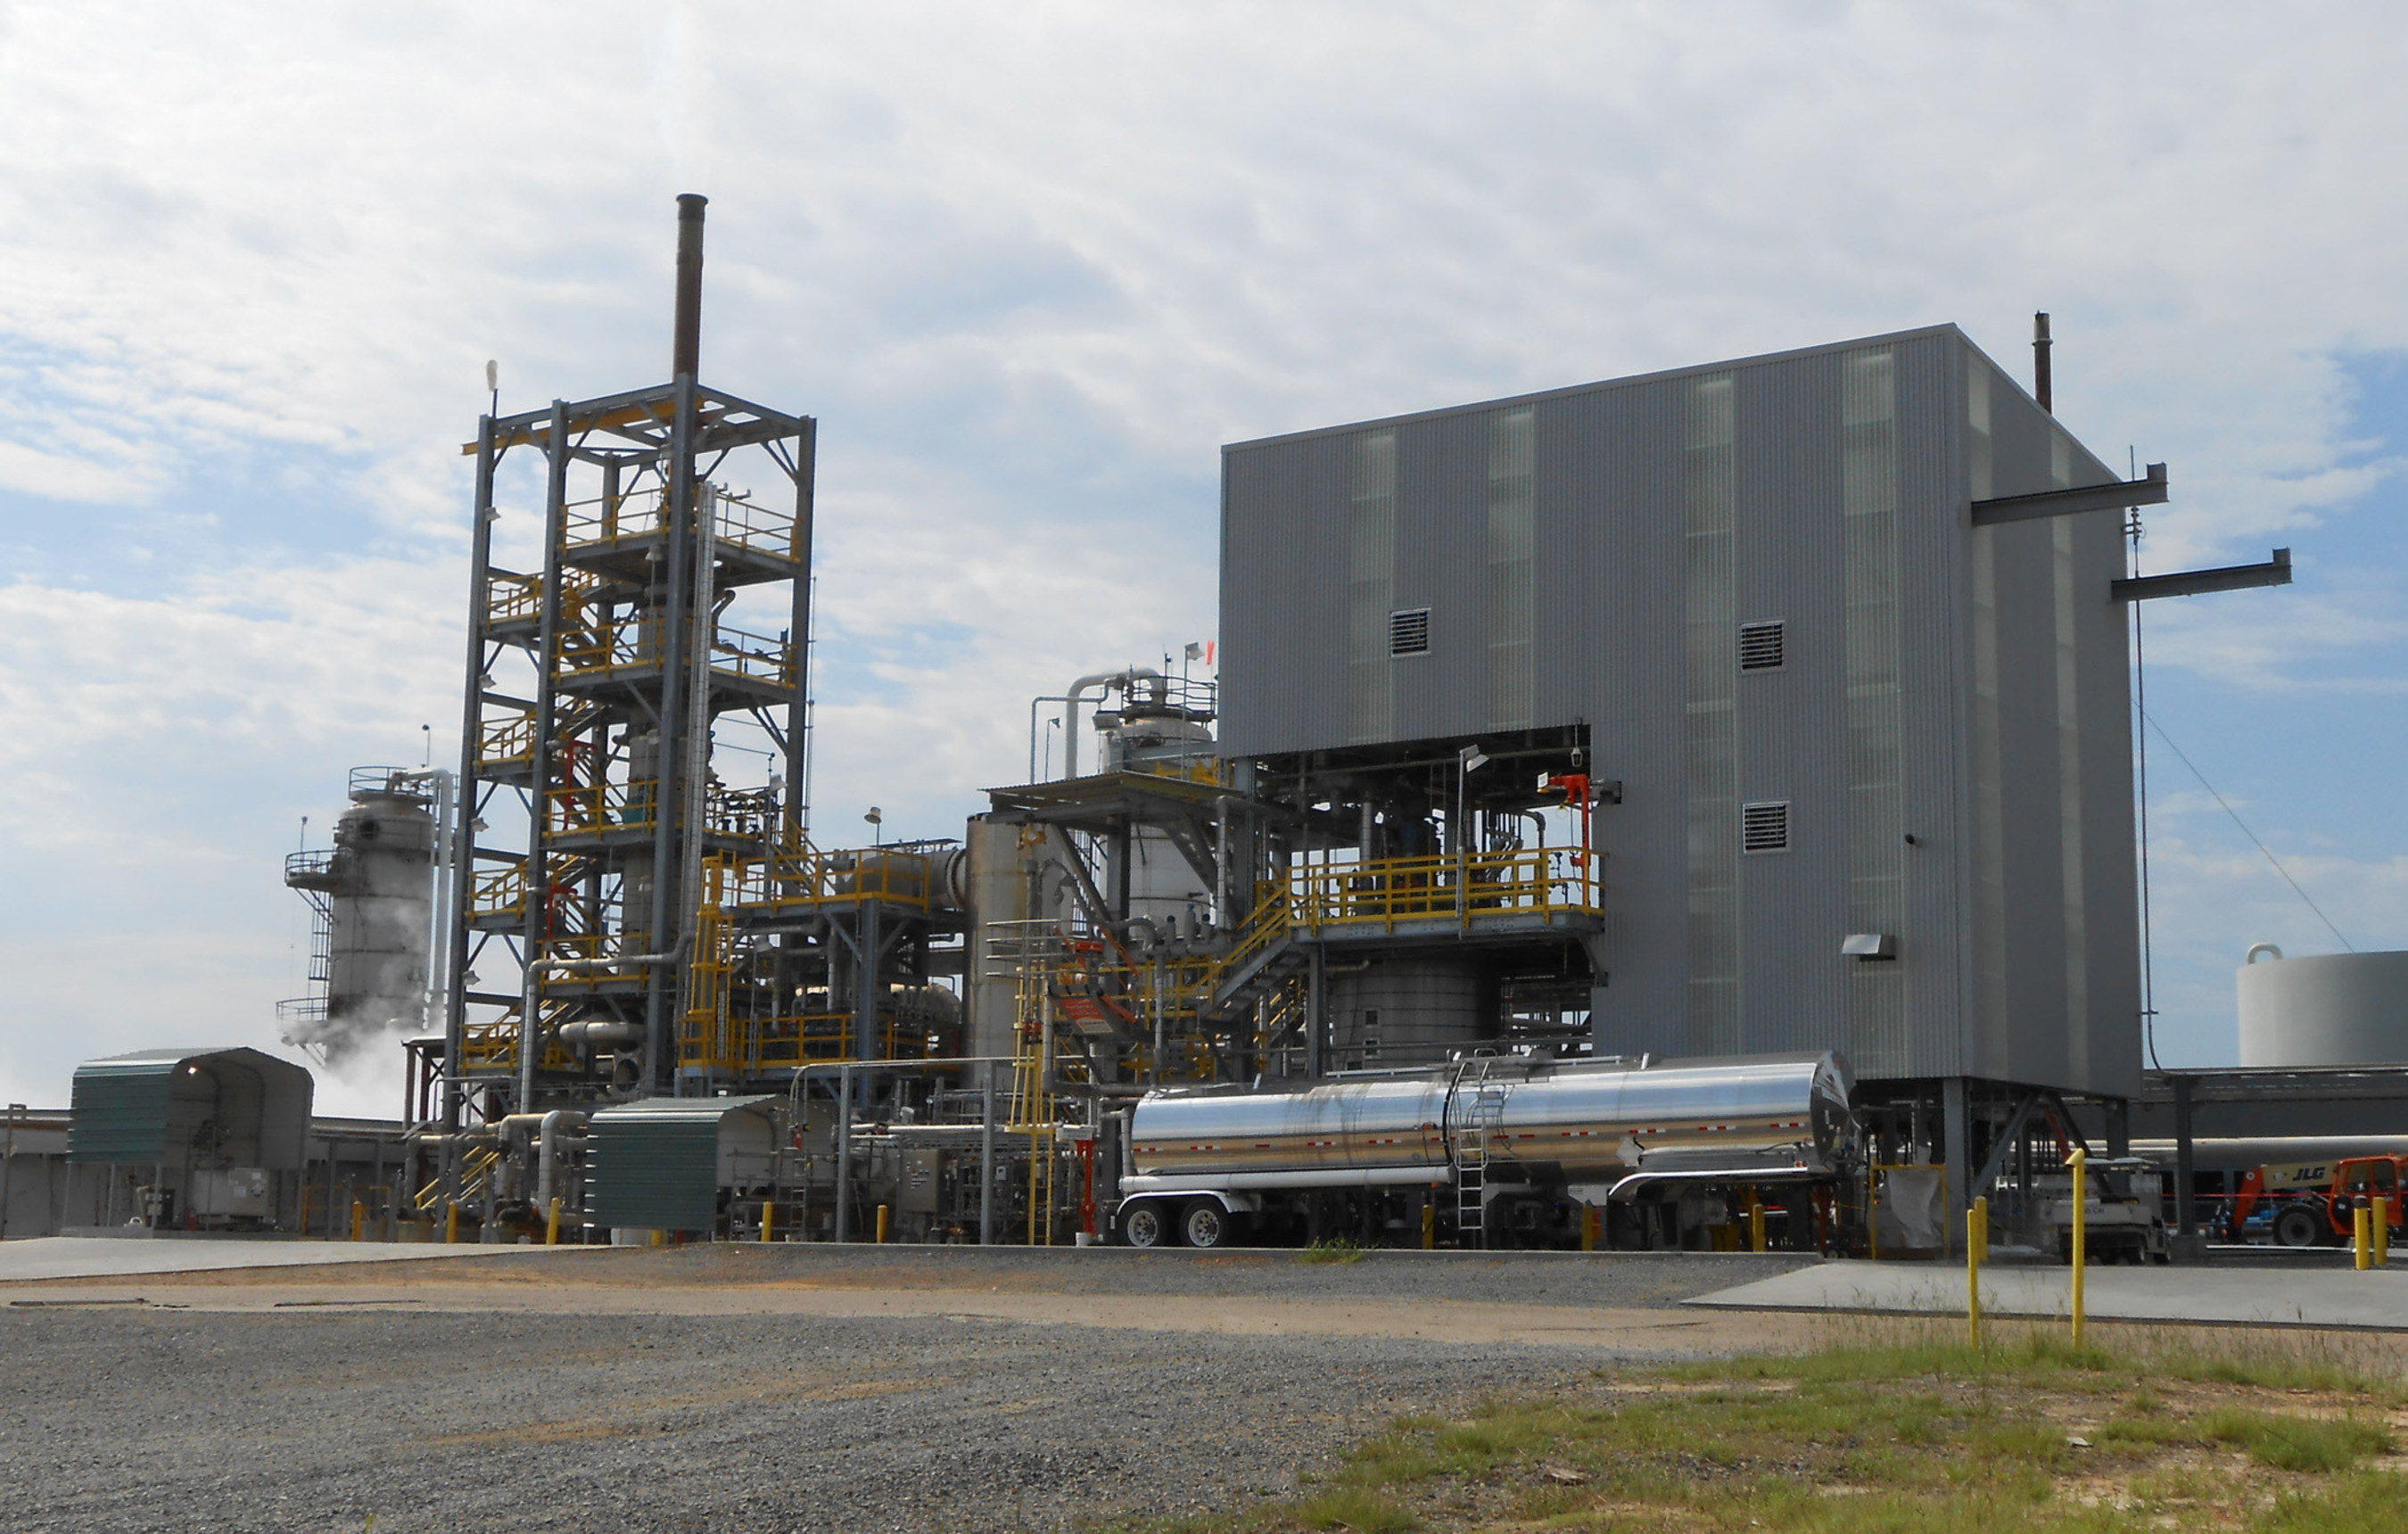 Albemarle Corporation's Bromine Recovery Unit in Magnolia, Arkansas